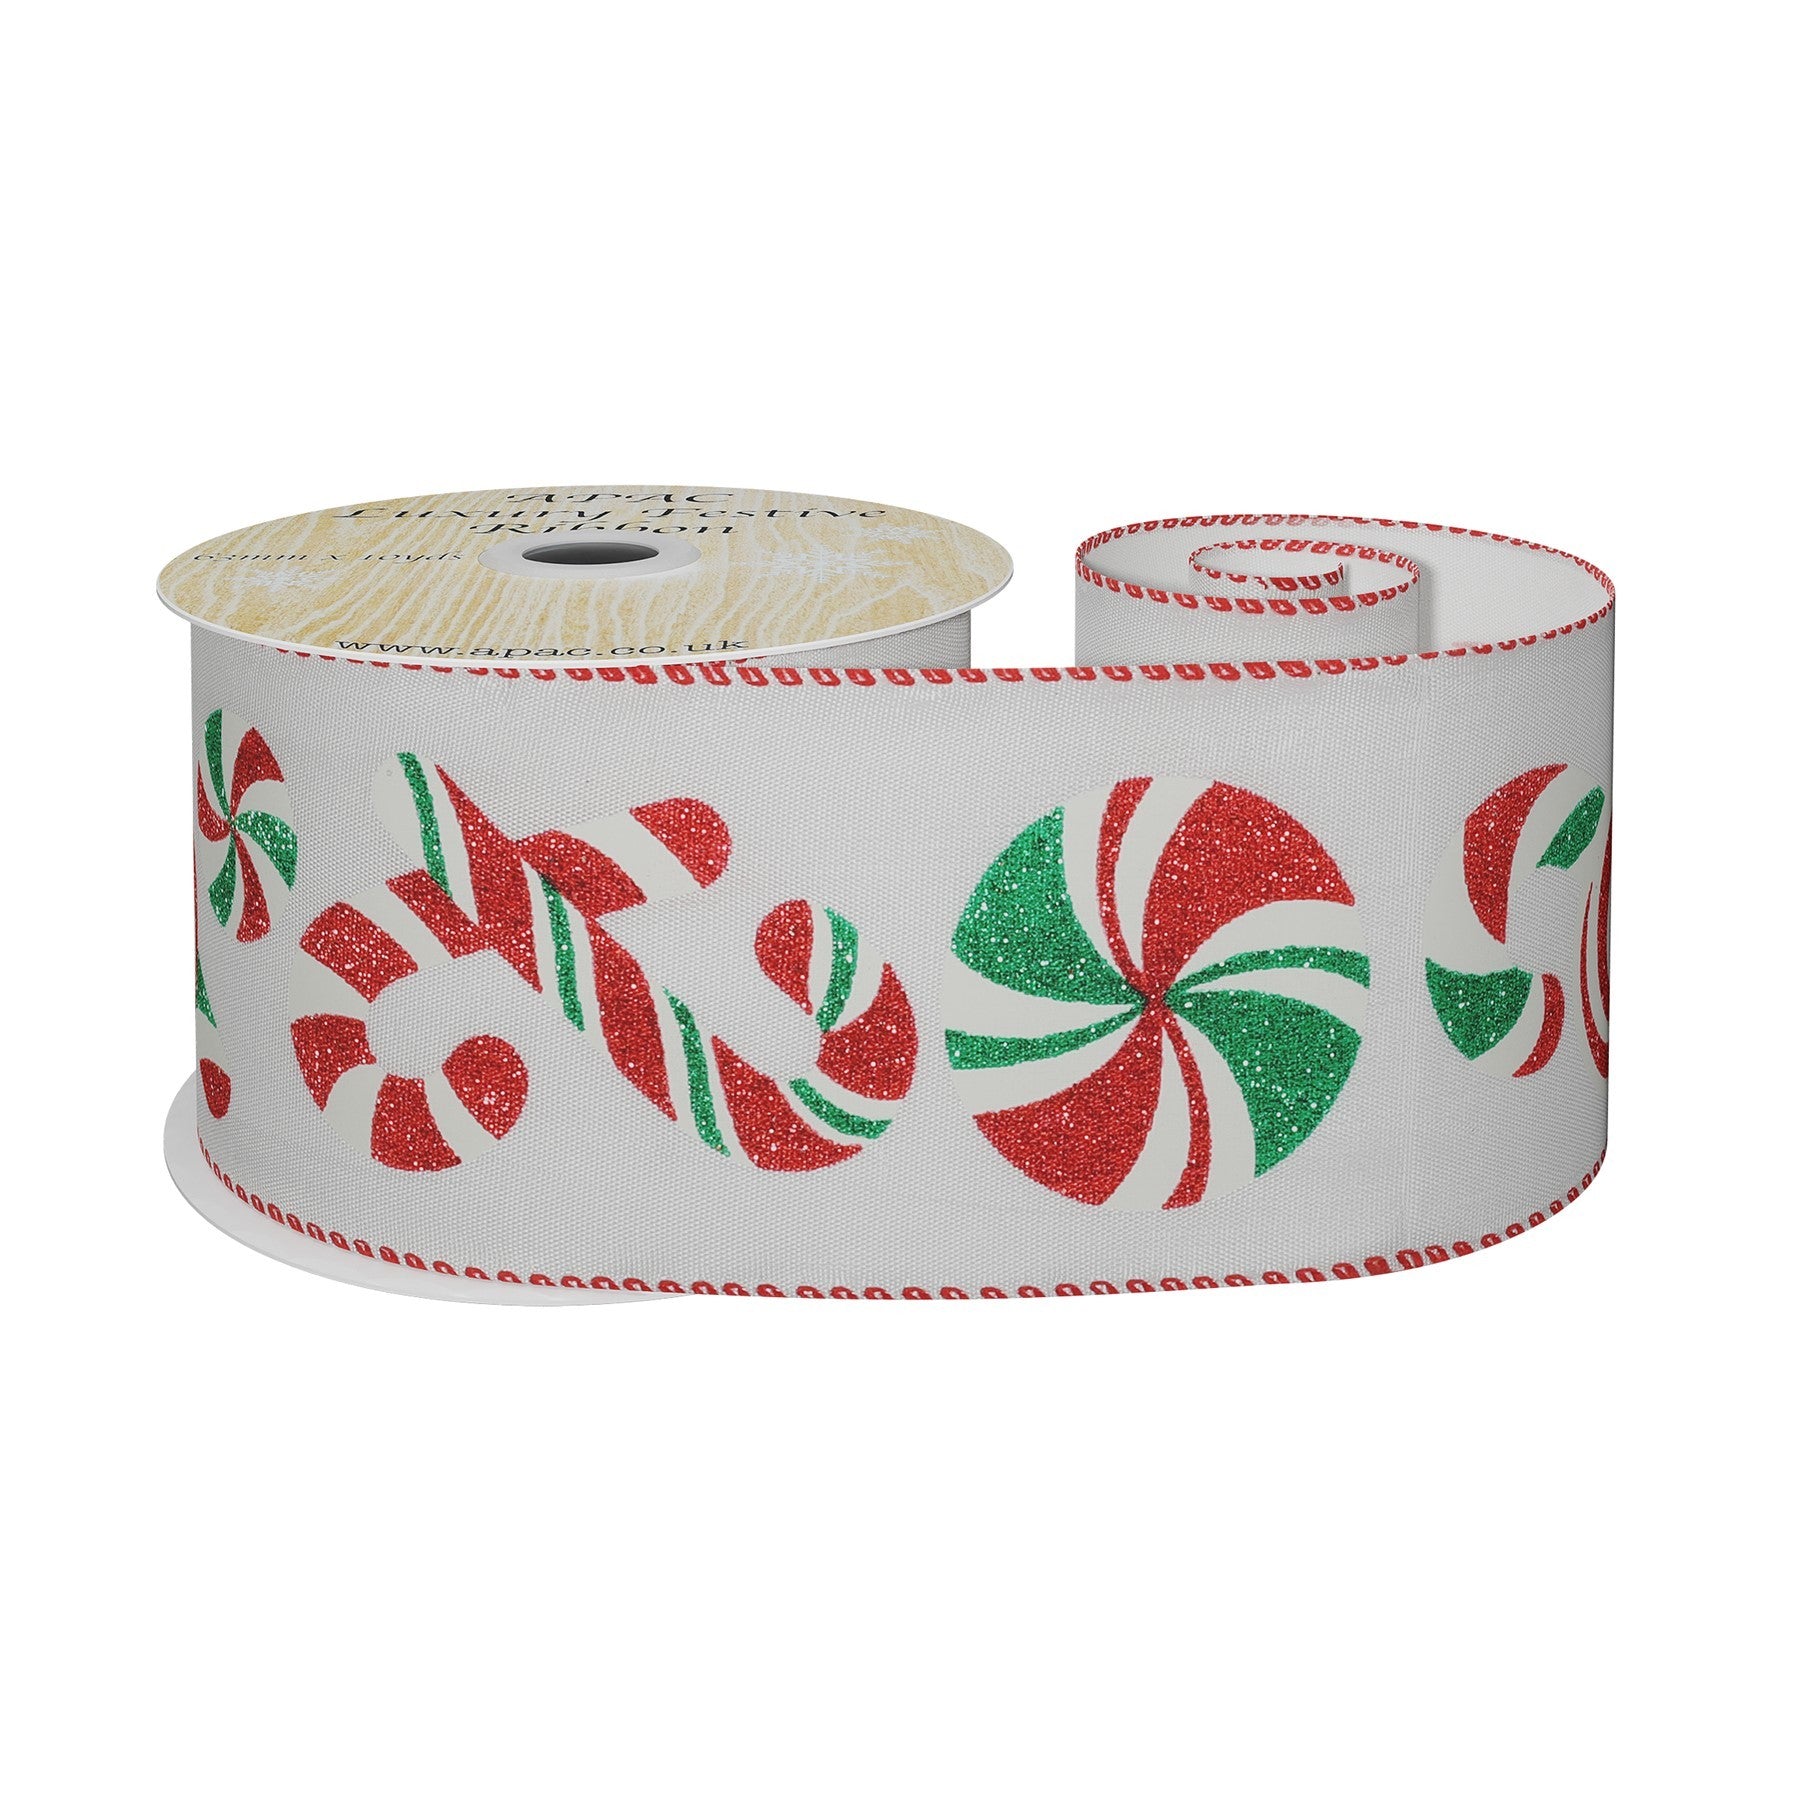 View Taffeta Ribbon with RedWhiteGreen Candy Canes 63mm x 9m information